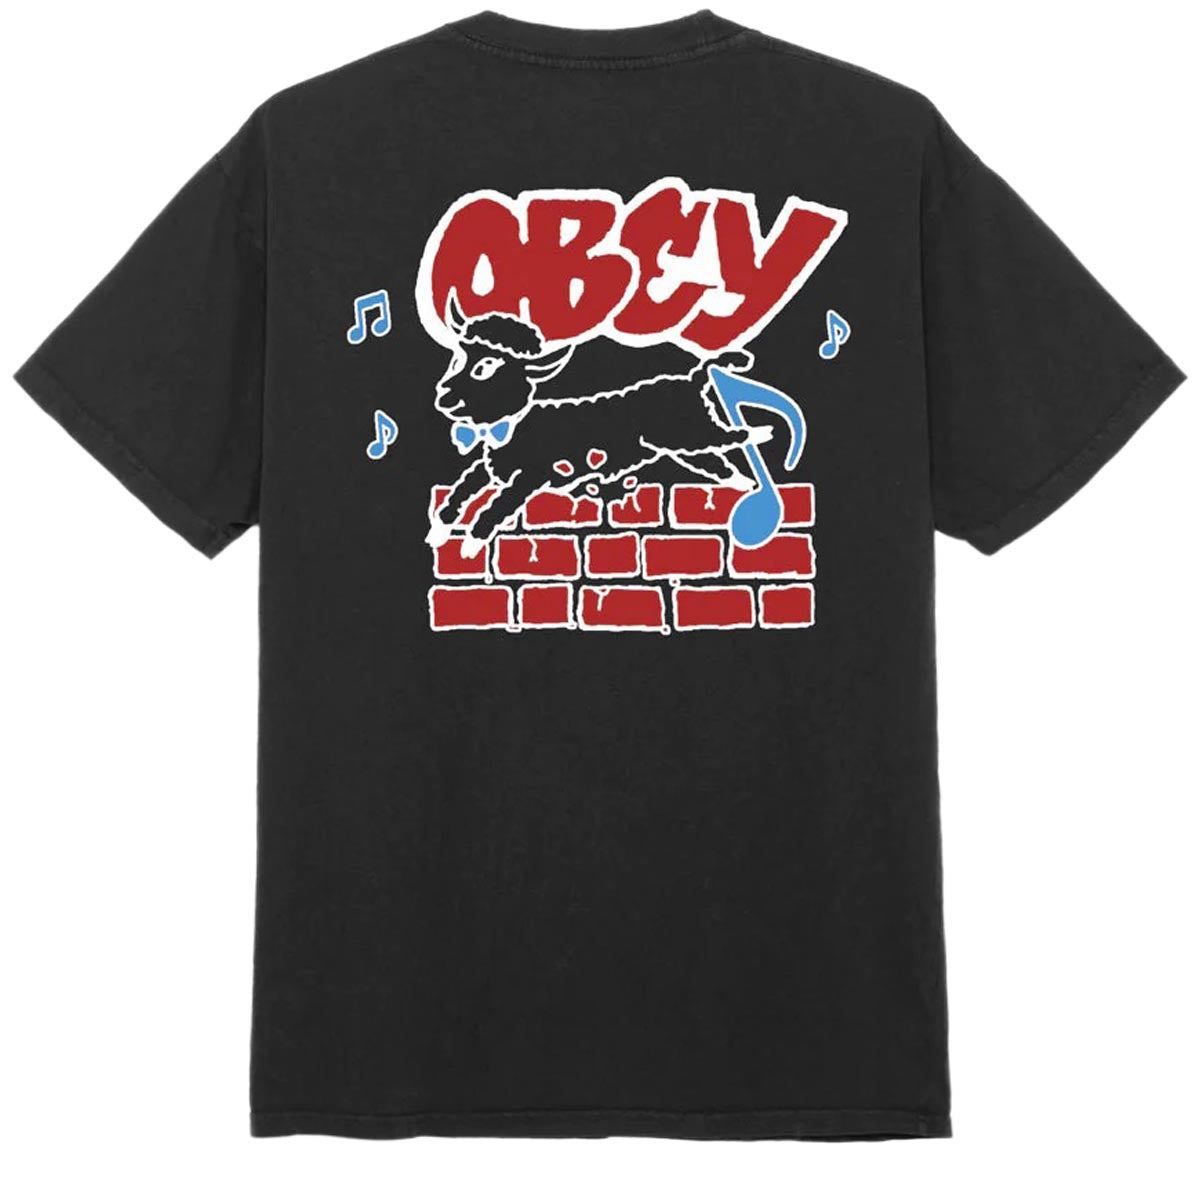 Obey Out Of Step T-Shirt - Pigment Vintage Black image 1